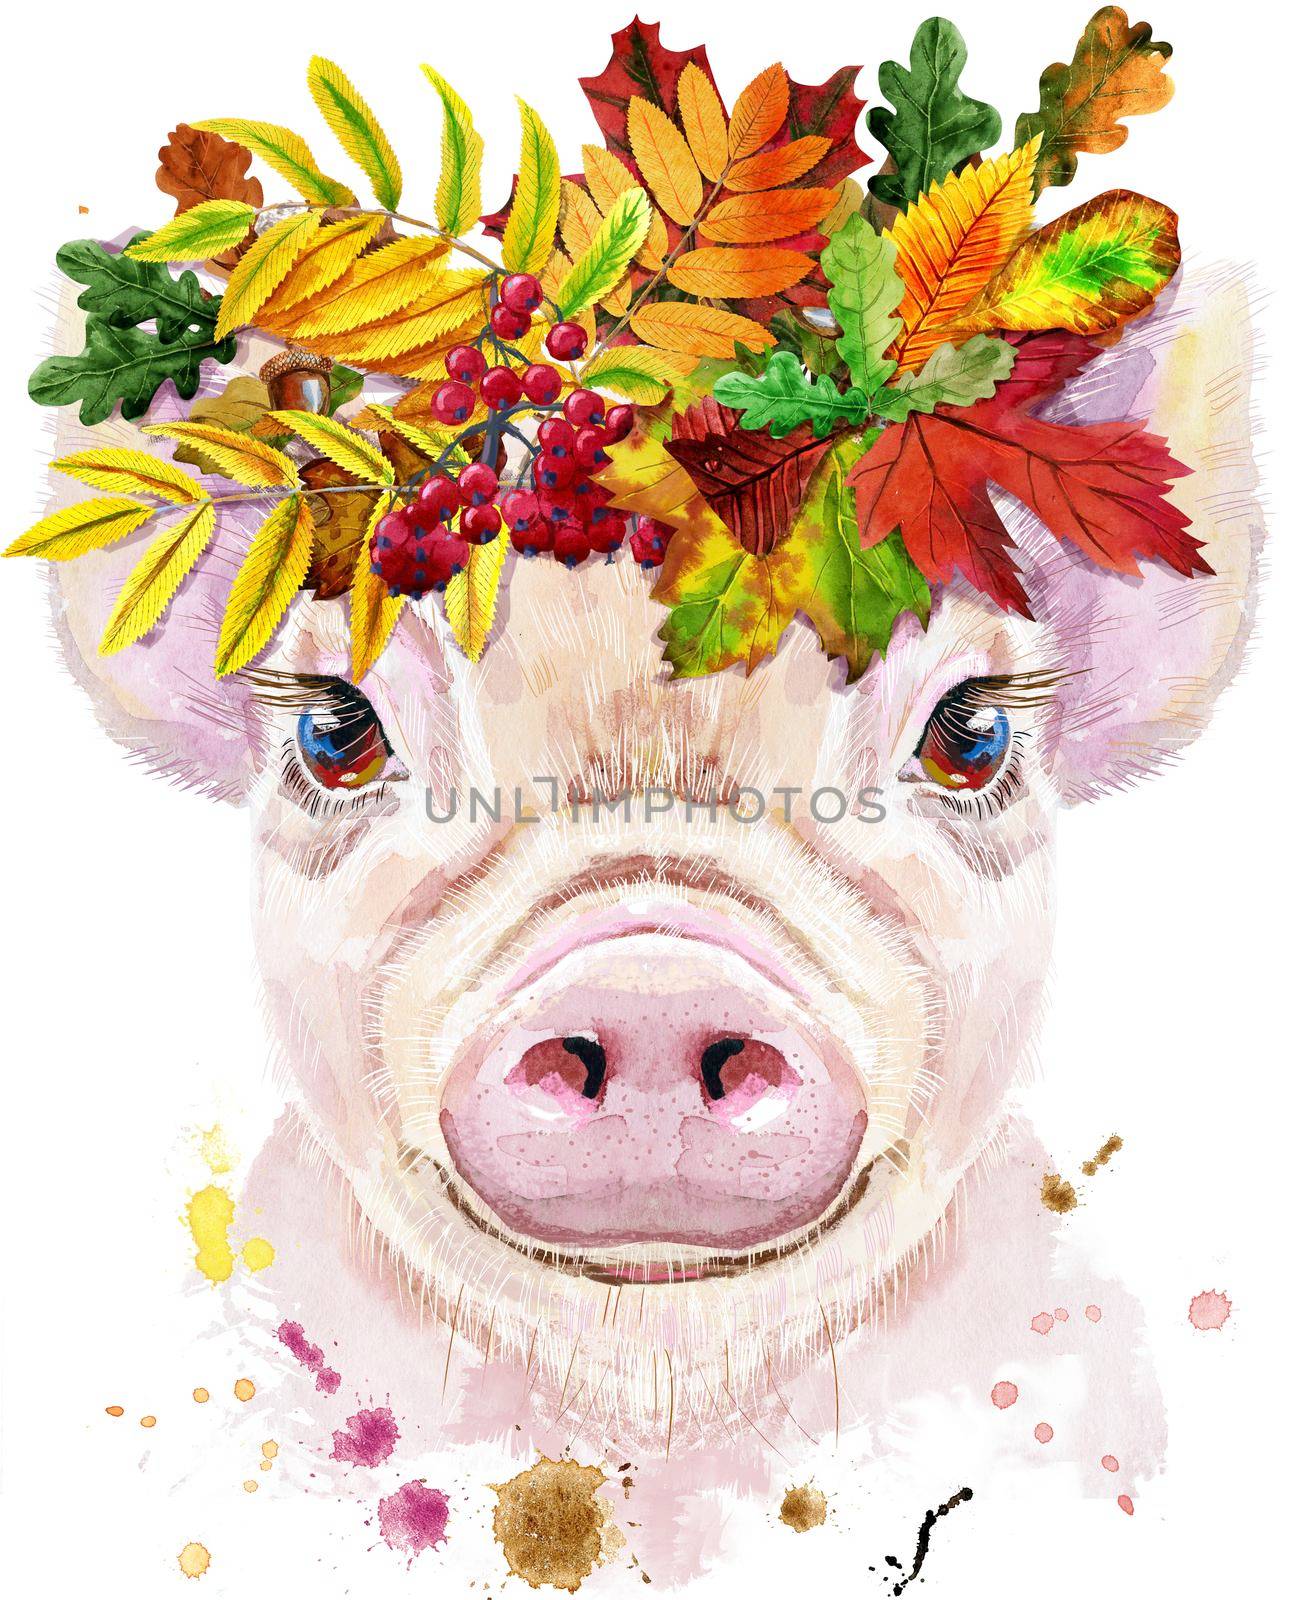 Watercolor portrait of mini pig with wreath of leaves by NataOmsk